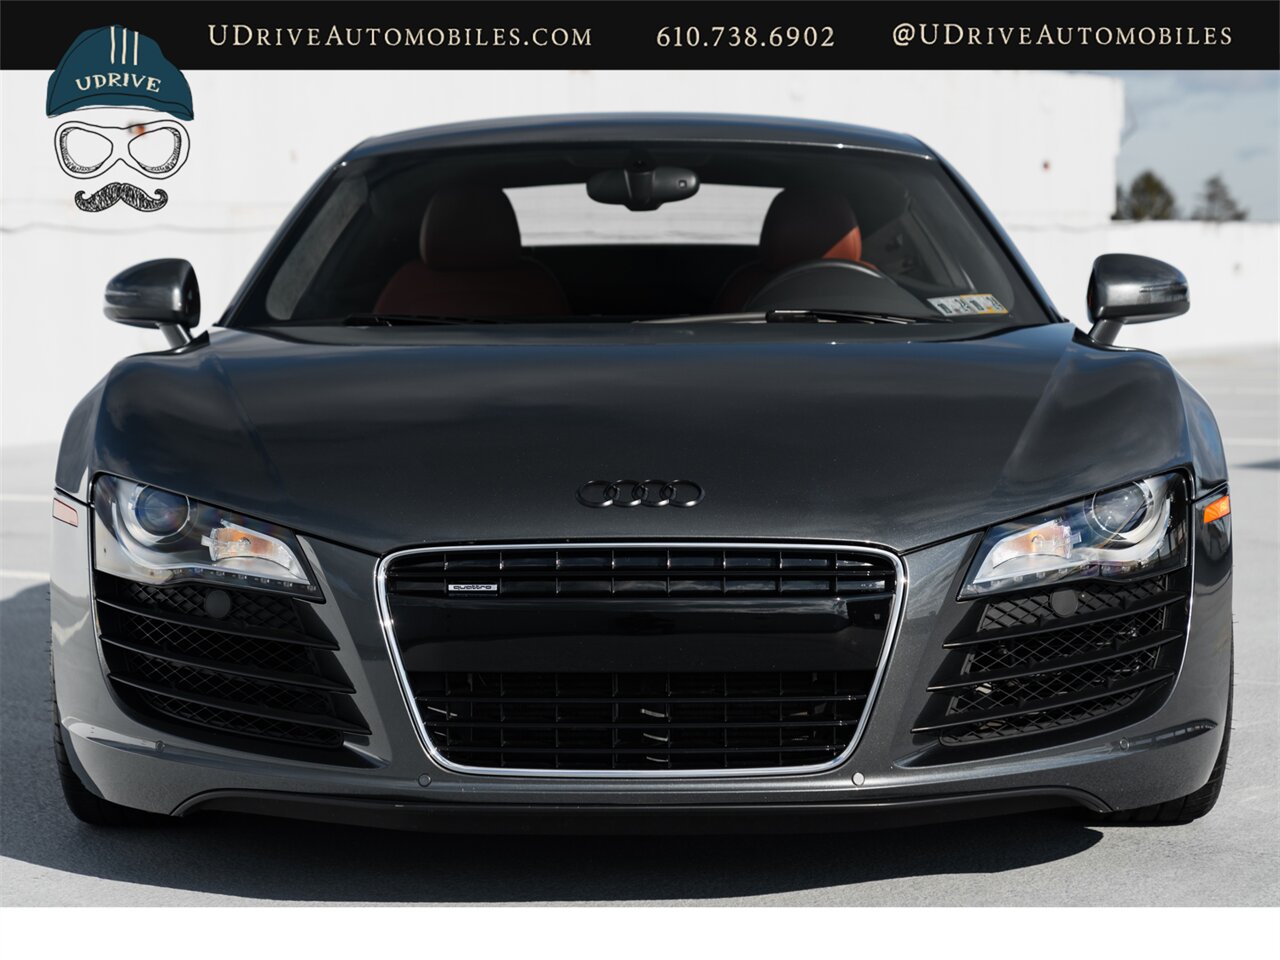 2009 Audi R8 Quattro  4.2 V8 6 Speed Manual 15k Miles - Photo 15 - West Chester, PA 19382